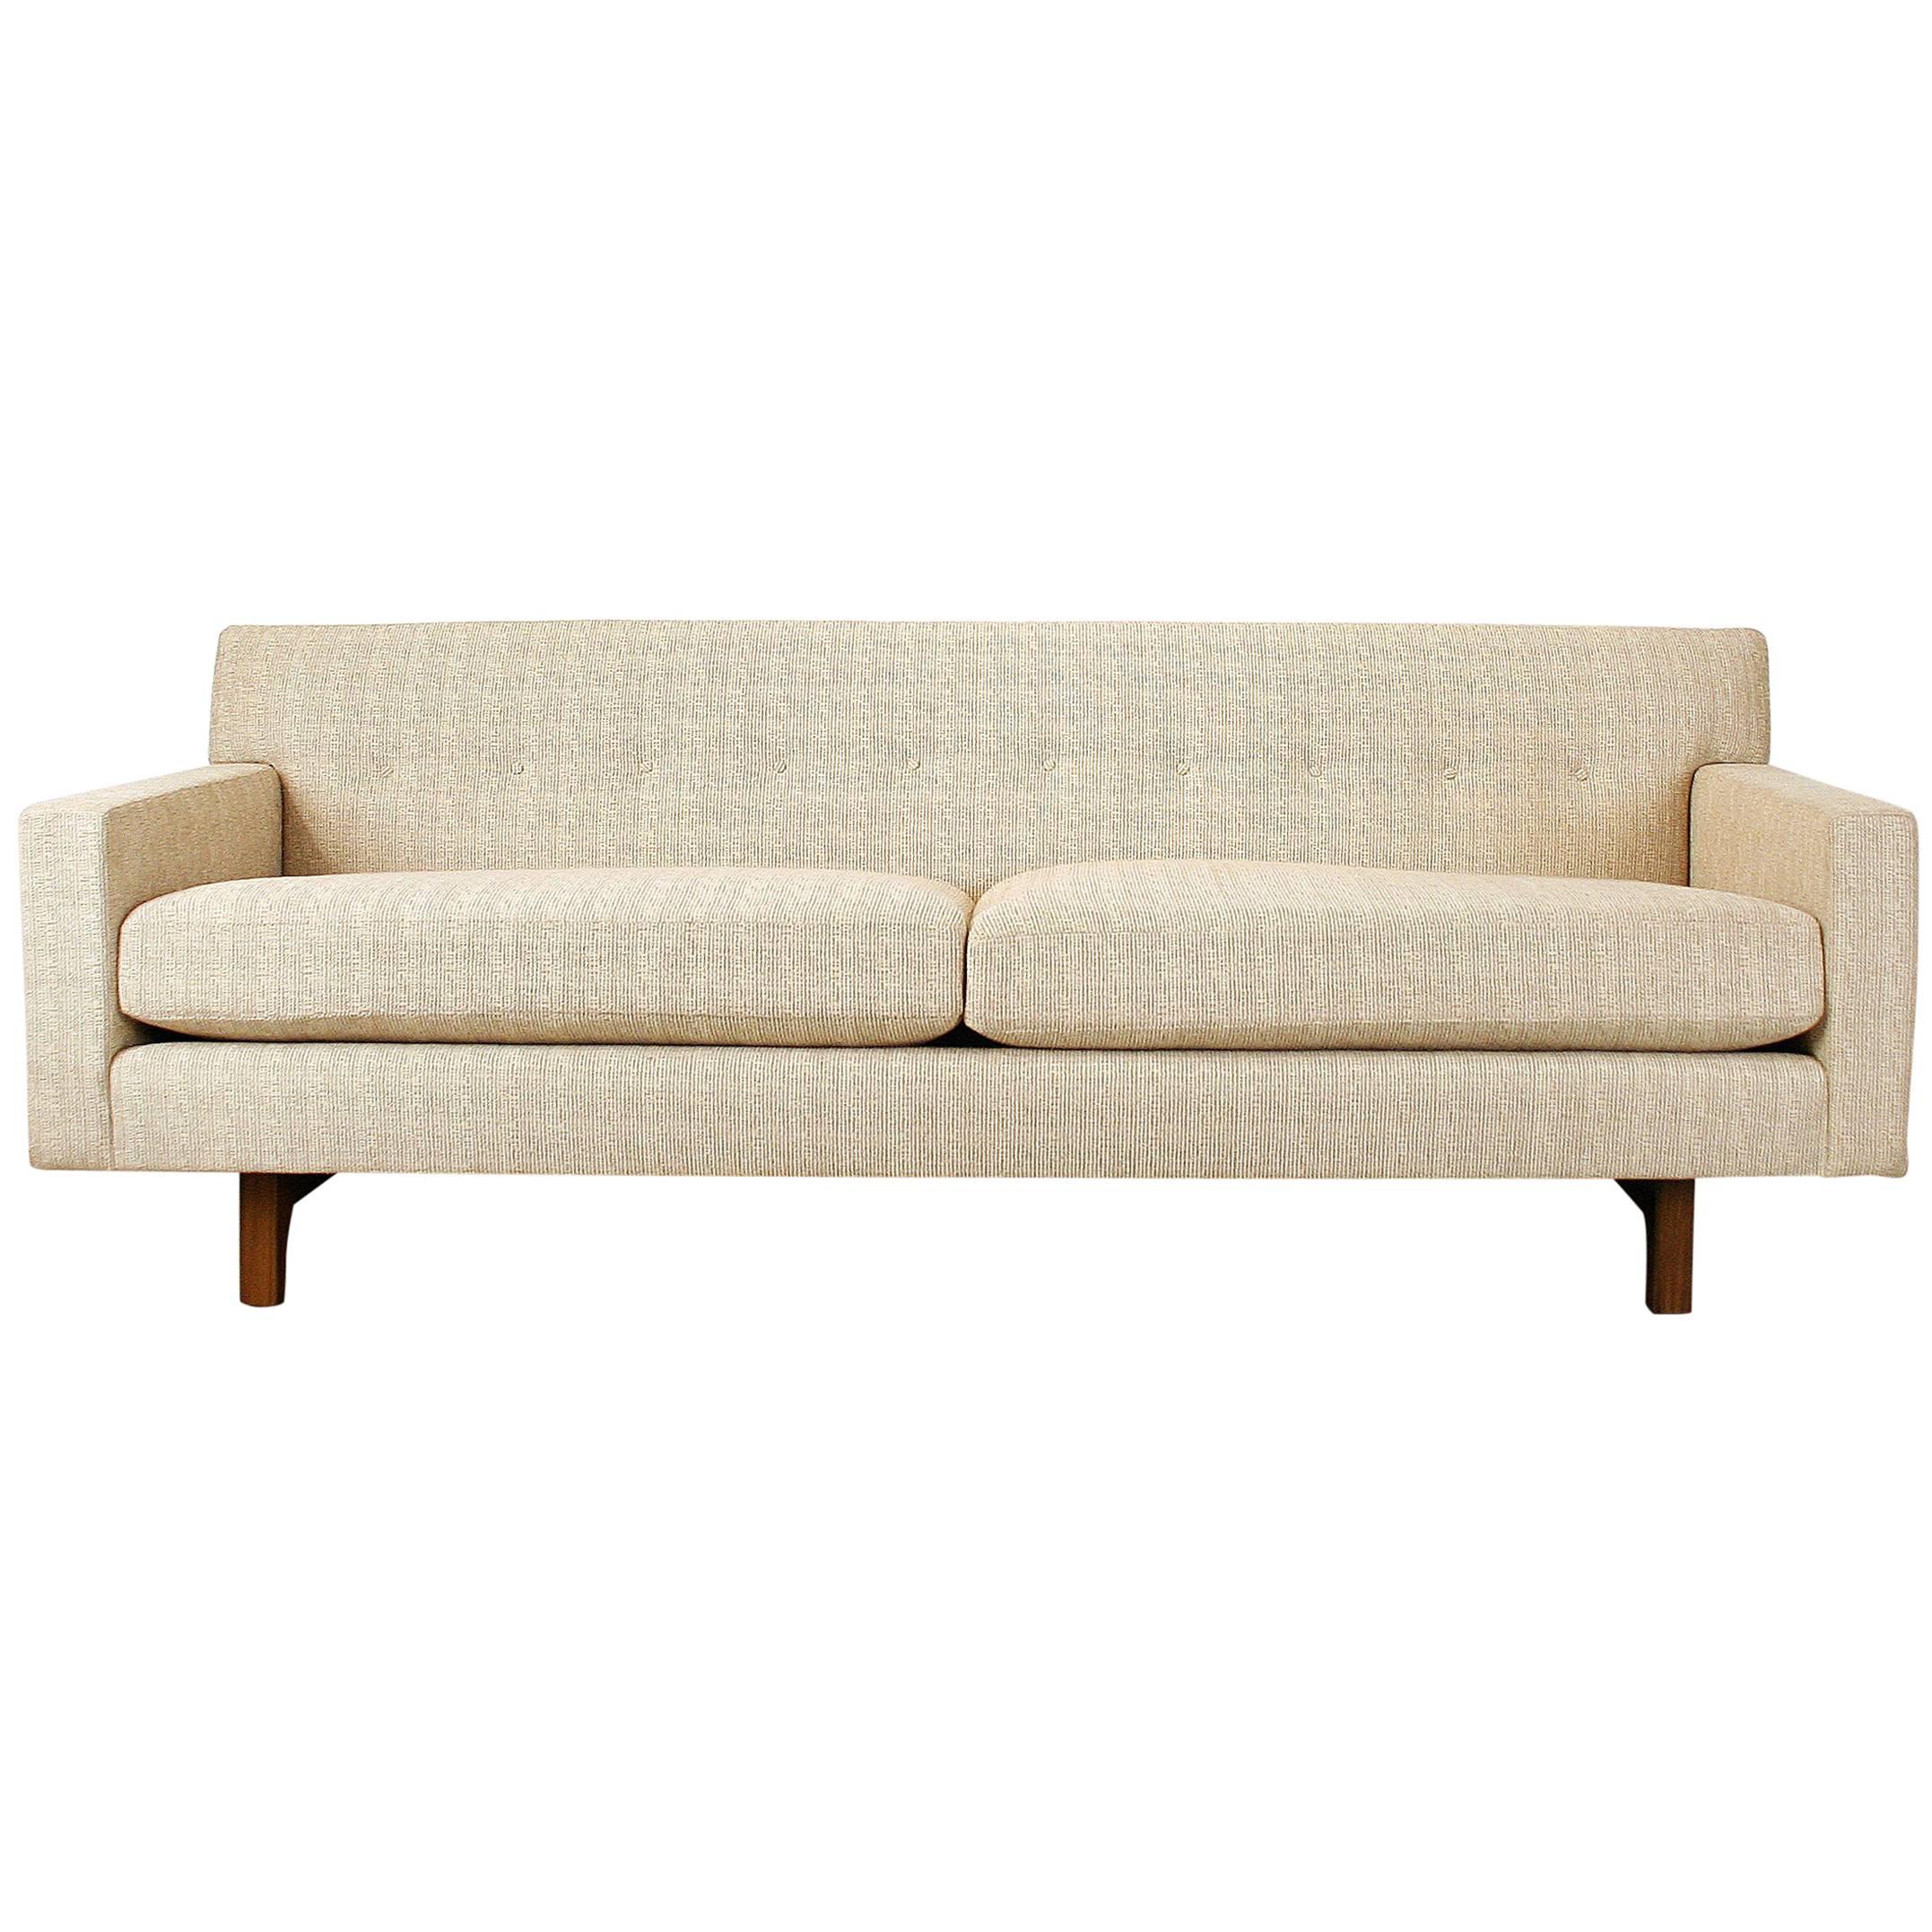 Dunbar Sofa by Steven Anthony For Sale